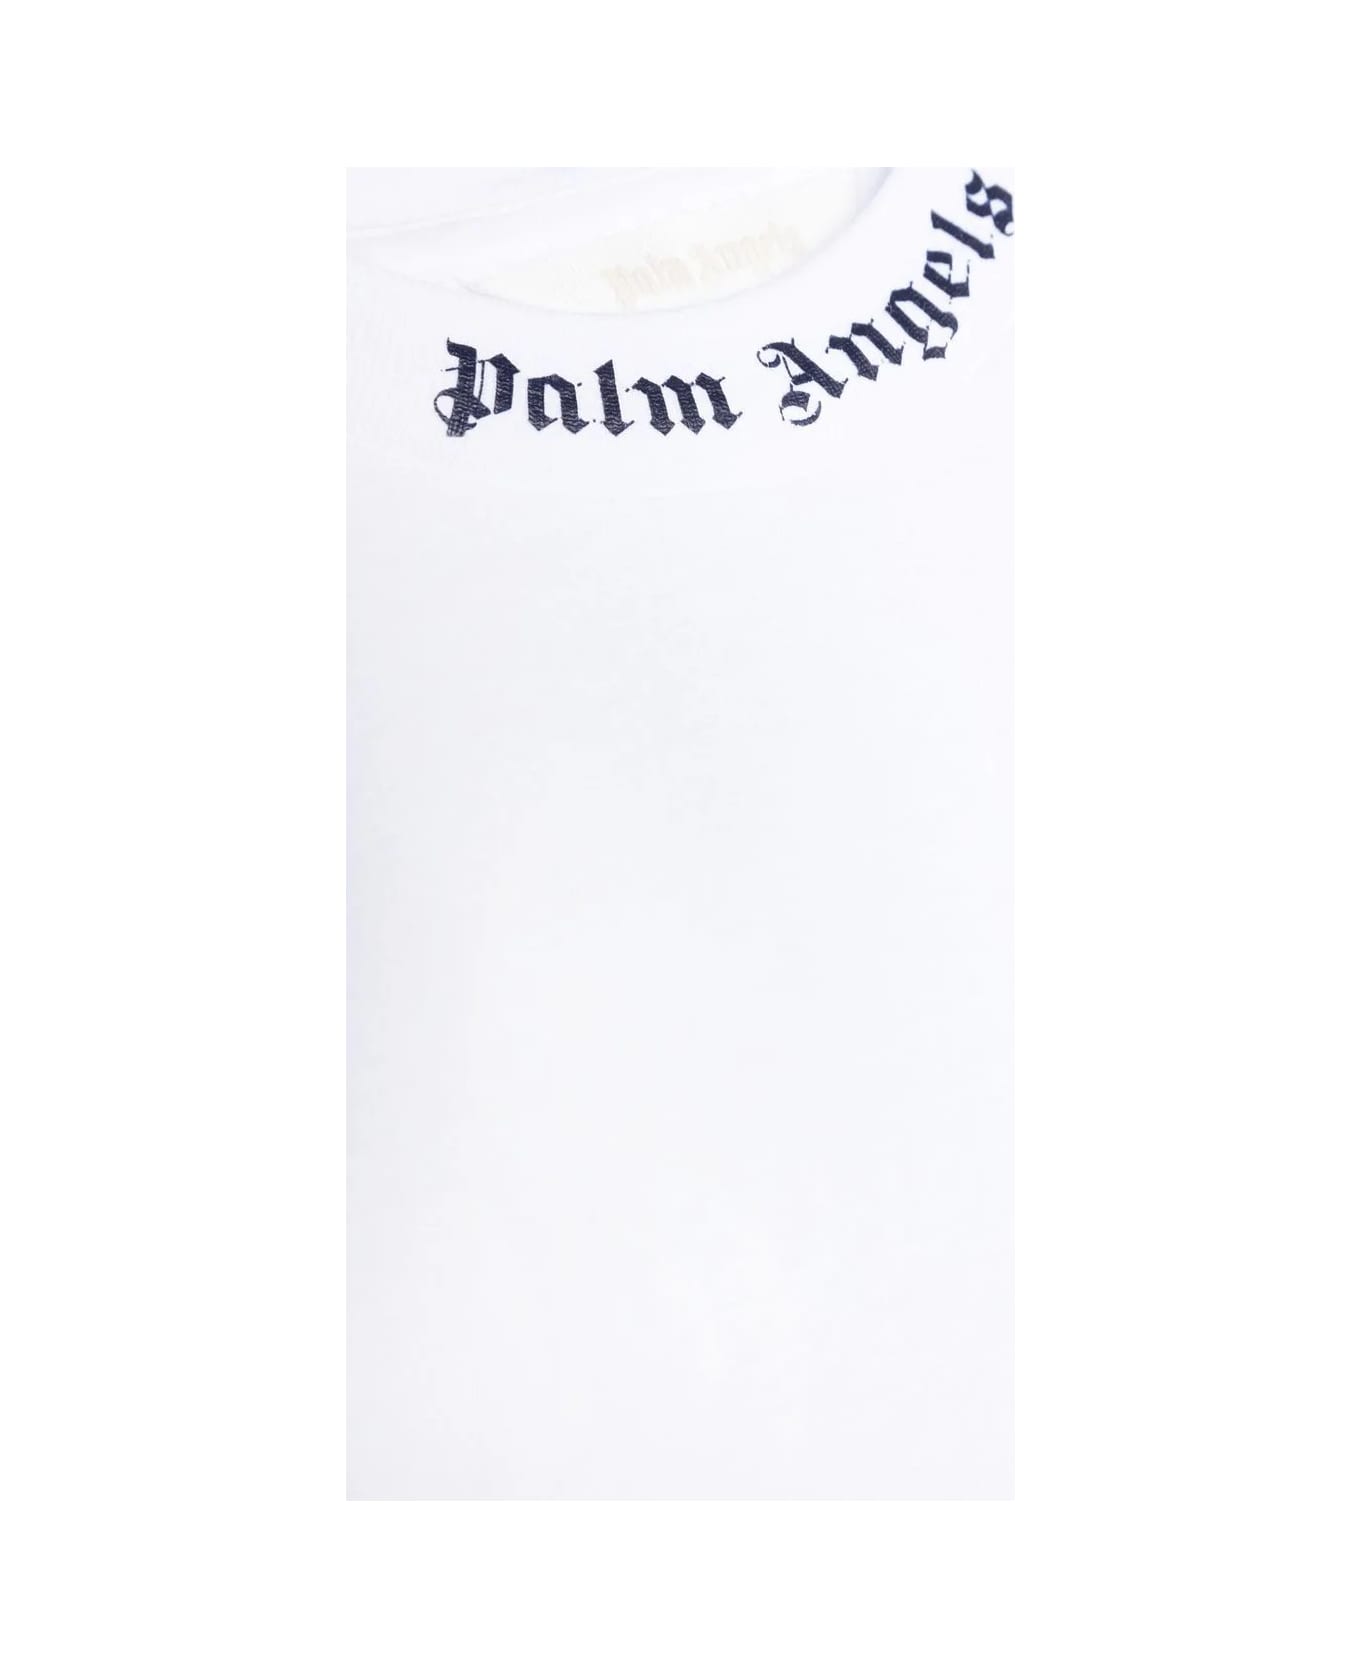 Palm Angels White T-shirt With Classic Logo - White